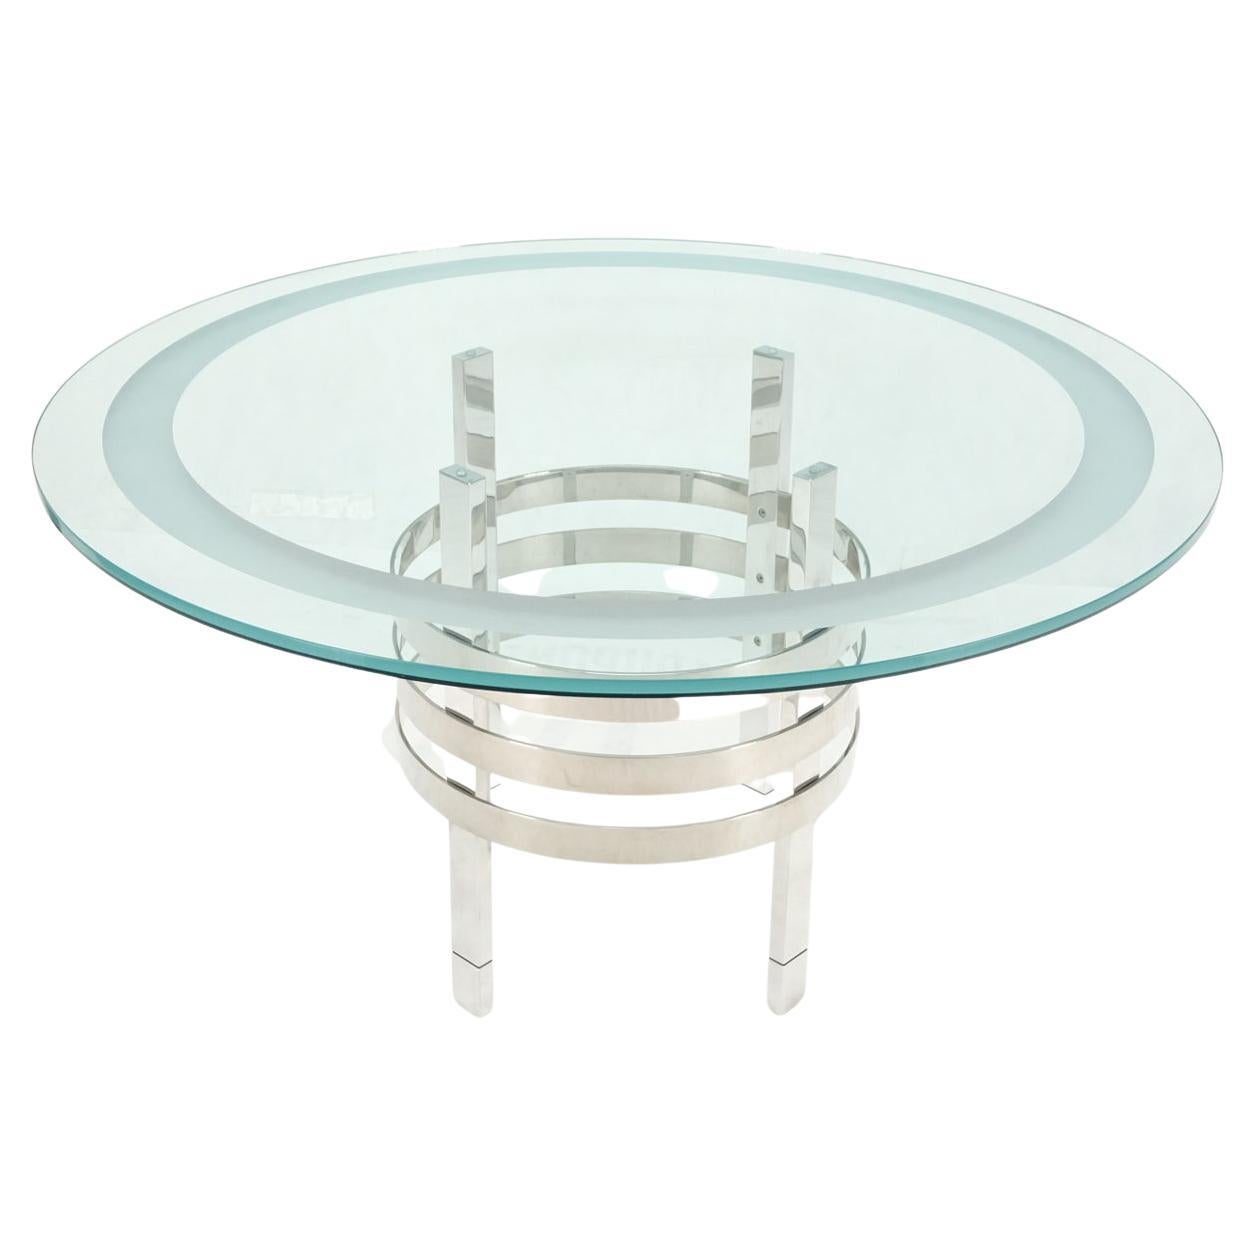 Heavy Polished Solid Stainless Steel Glass Round Dining Game Table Ribbed Design For Sale